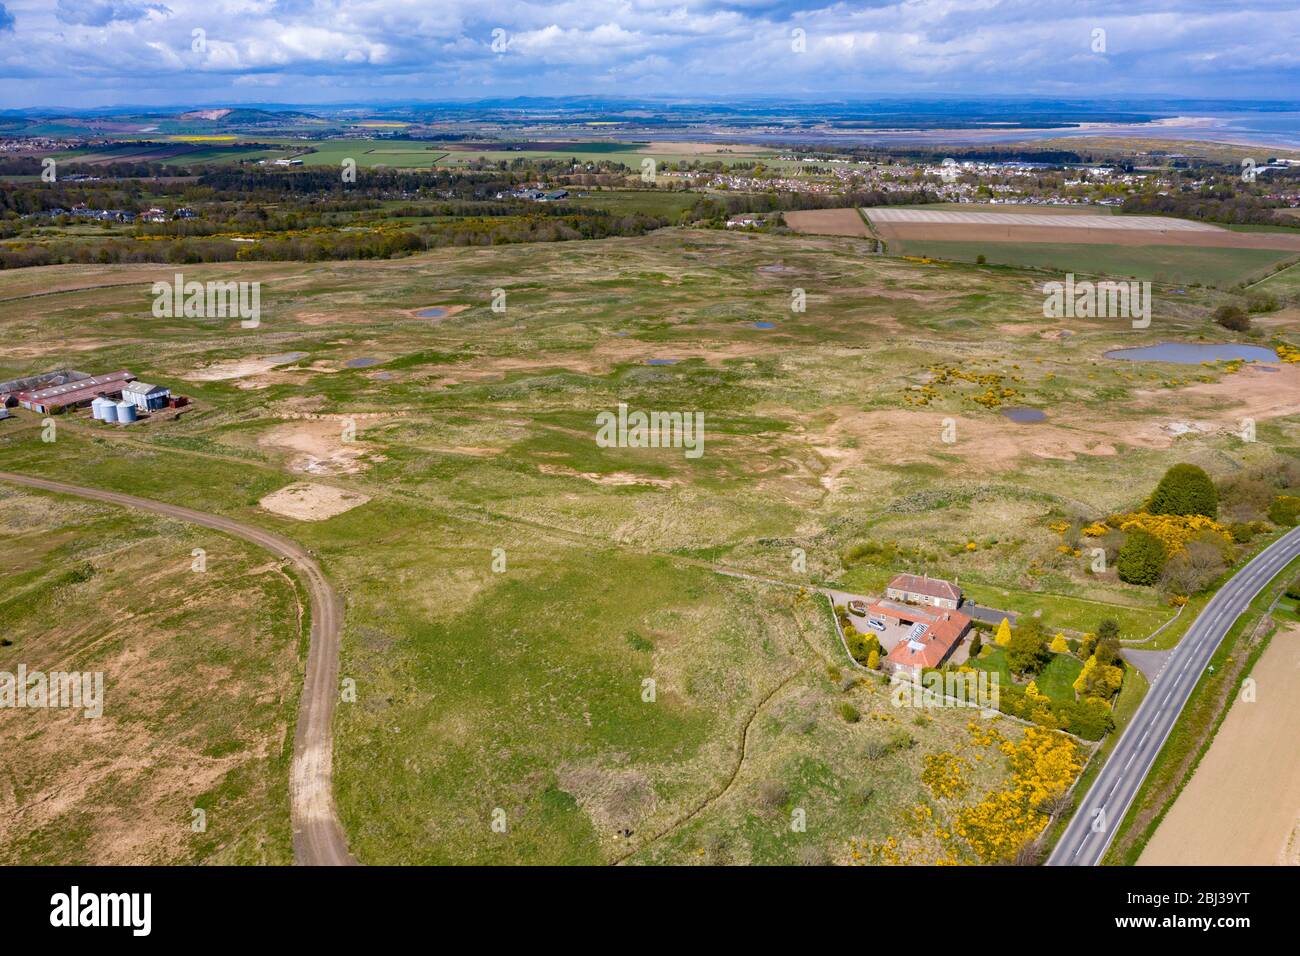 St Andrews, Scotland, UK. 28 April 2020. Aerial view of Feddinch Mains, a 240 acre site outside St Andrews in Fife, that has gone on the market. The land includes a partially built golf course and planning permission for a new 18 hole golf course and clubhouse. Iain Masterton/Alamy Live News Stock Photo